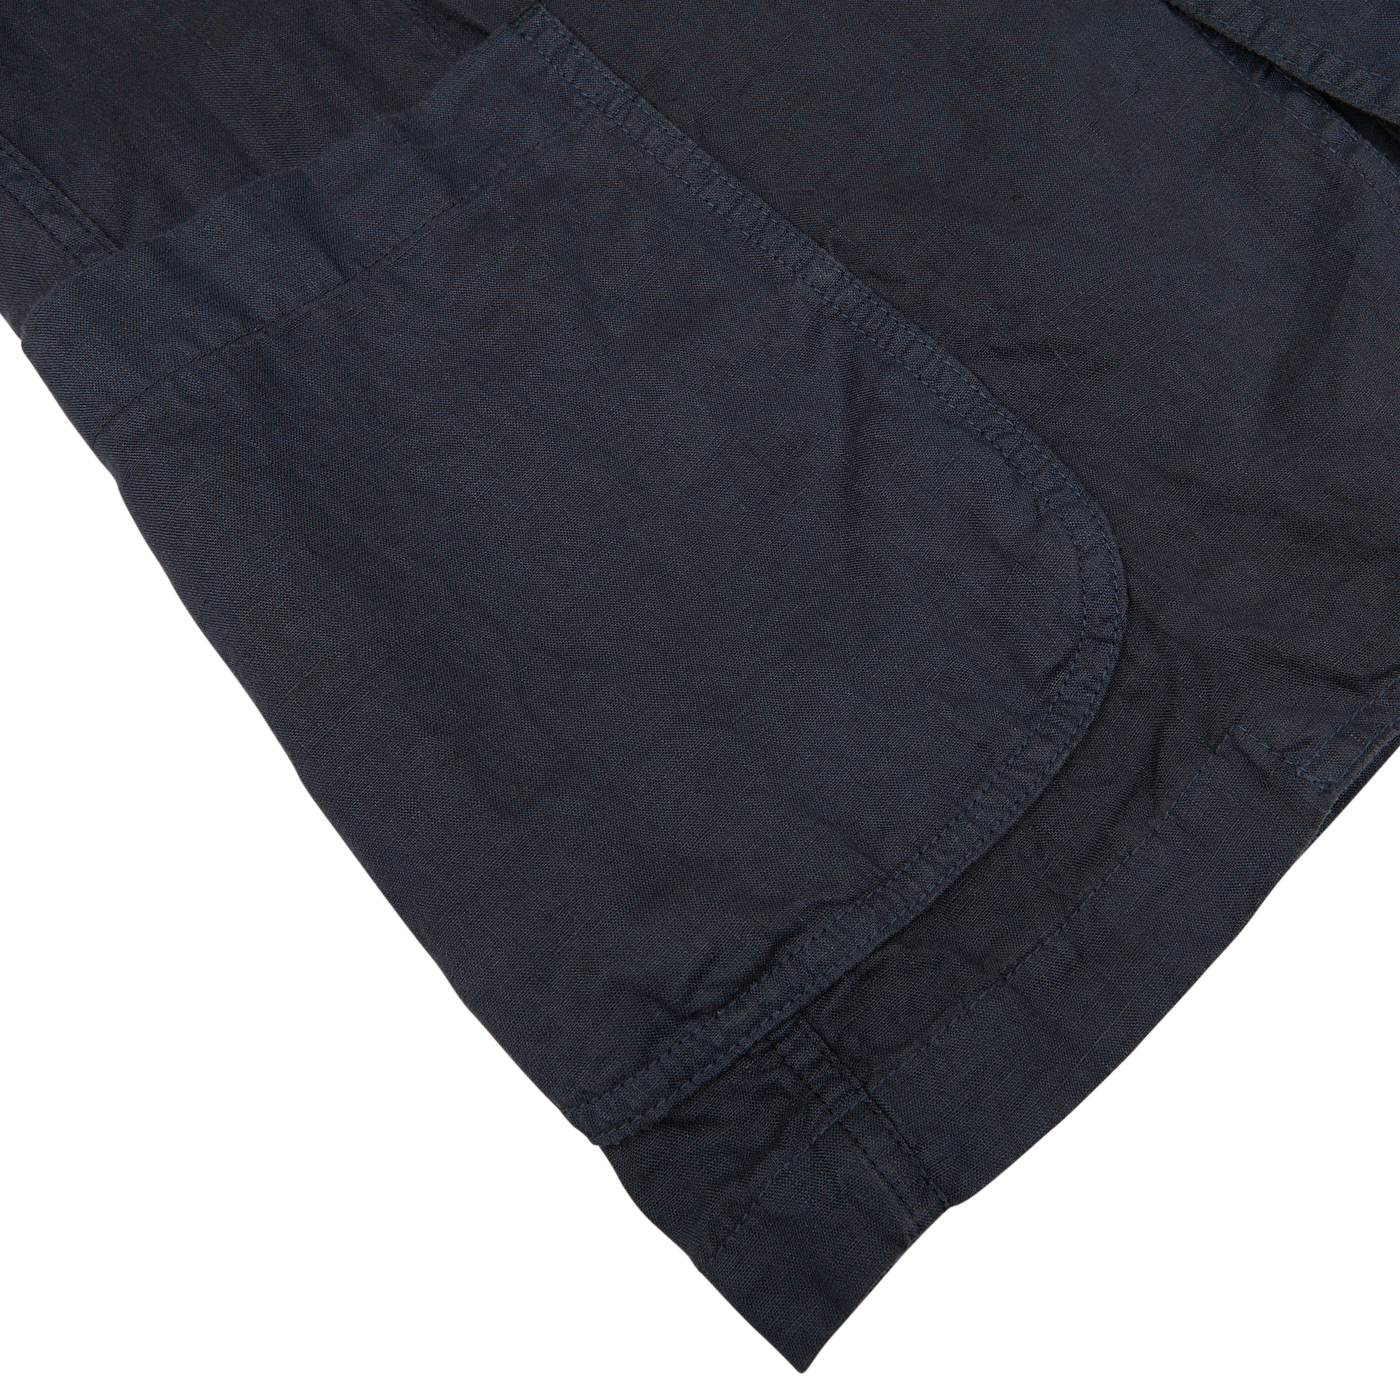 Close-up of a Navy Blue Washed Linen Samuraki Jacket fabric with detailed stitching, possibly a pocket of an Aspesi garment, on a white background.